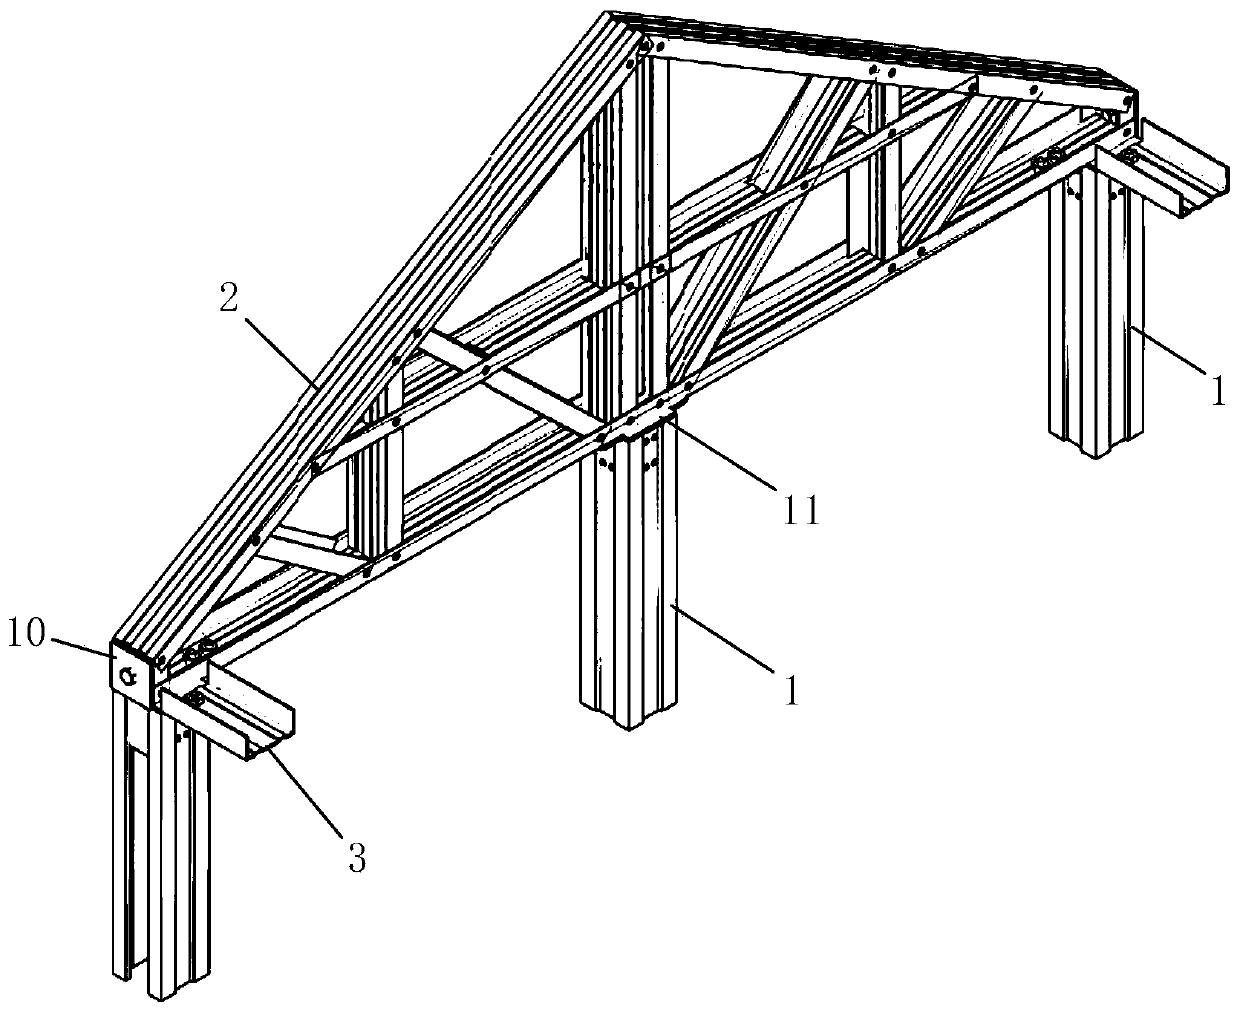 Roofing structure for assembling house